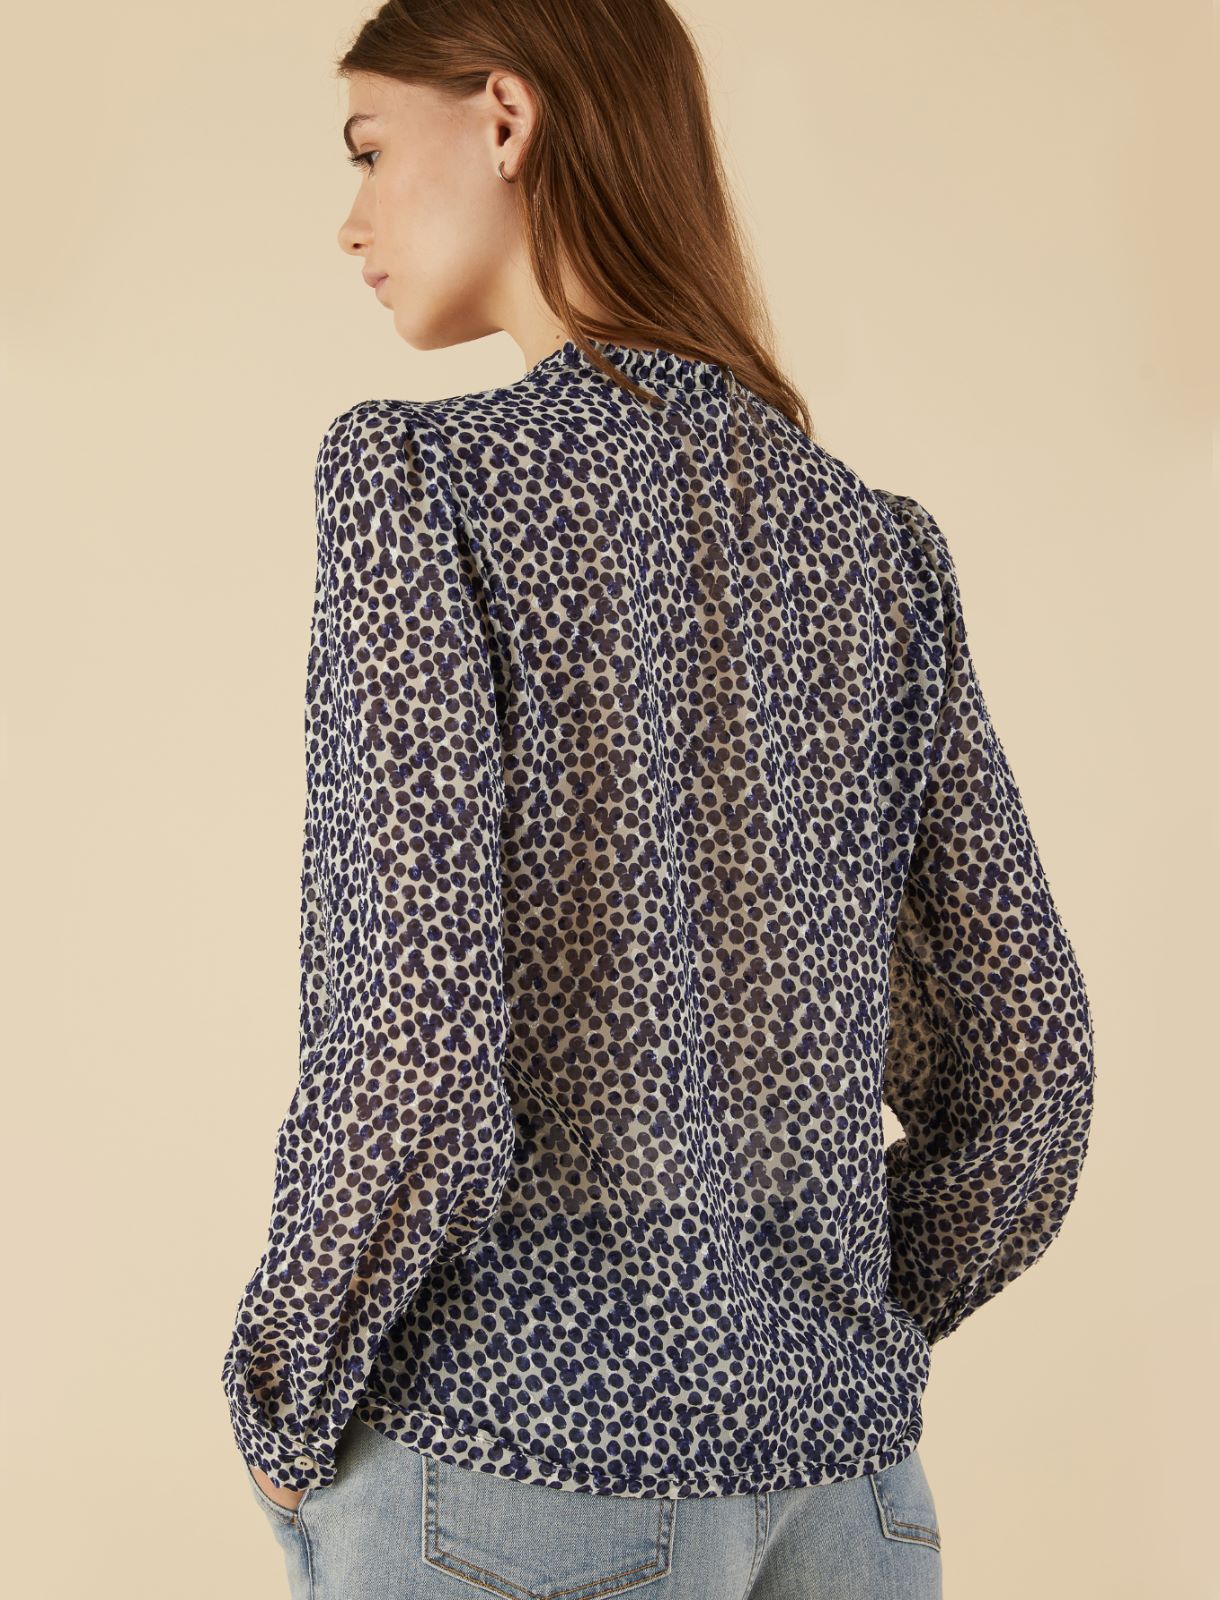 Dotted Swiss blouse - Navy - Marella - 2